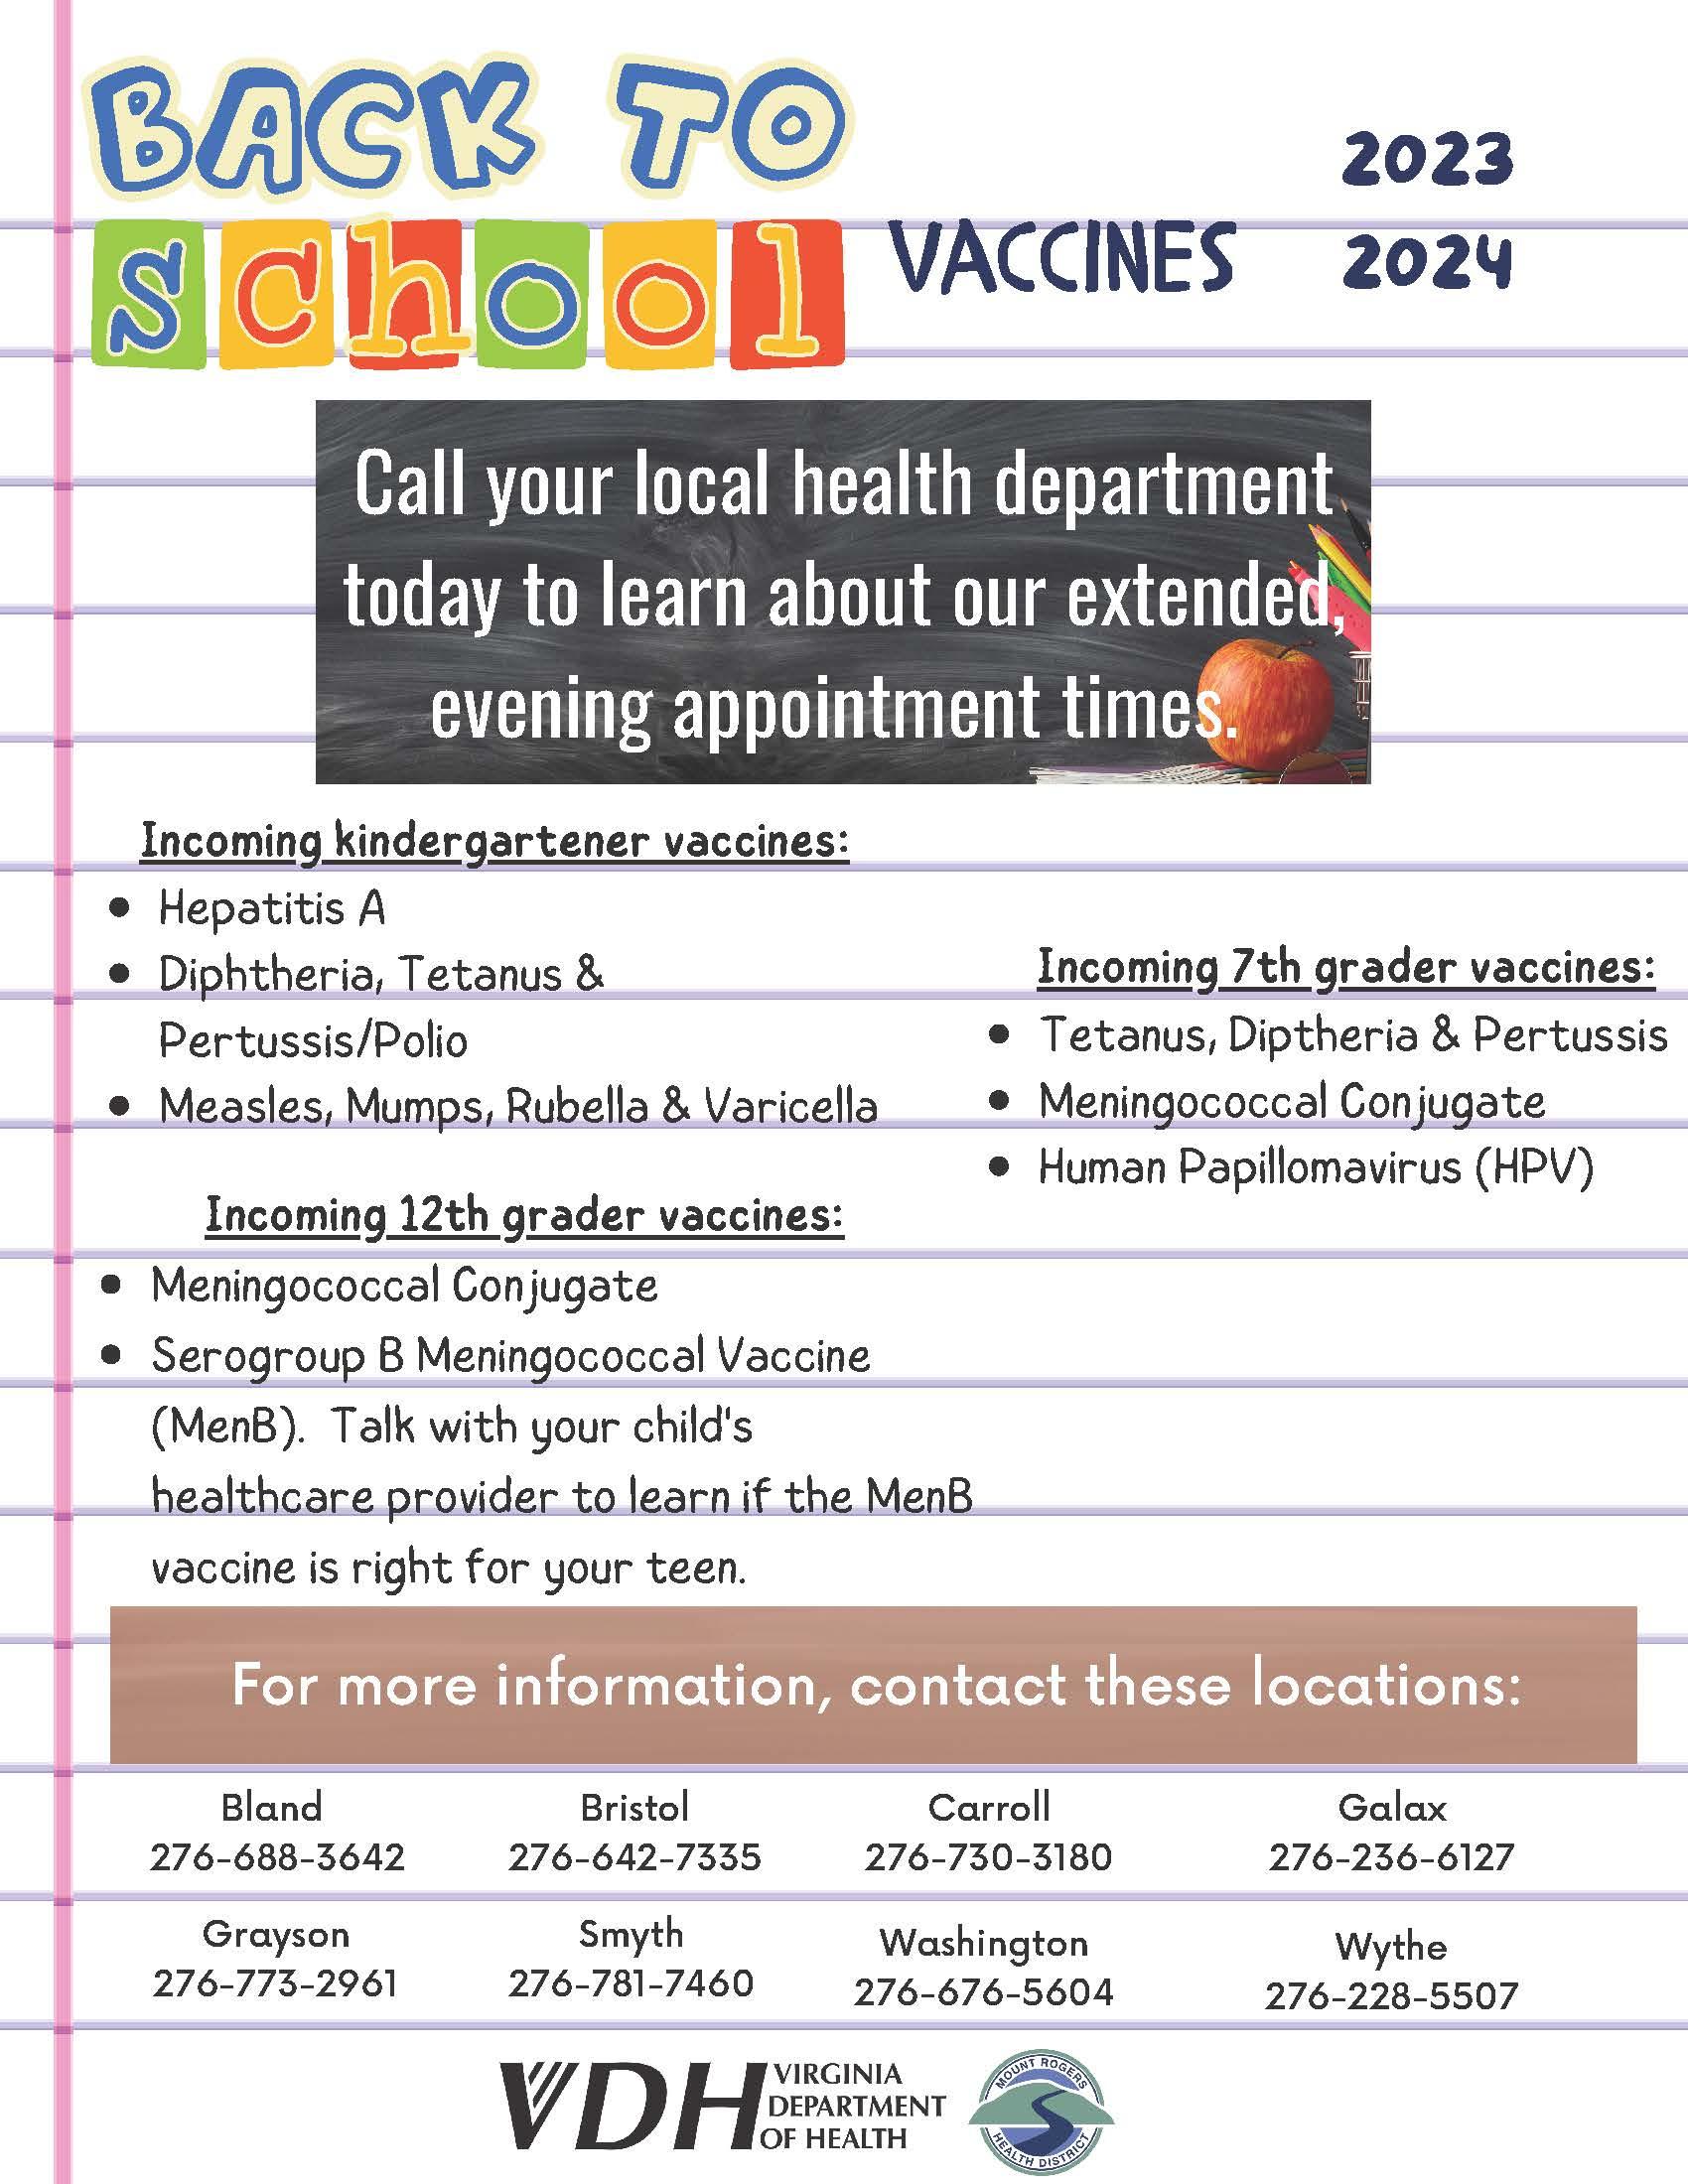 VDH Extended hours for vaccines